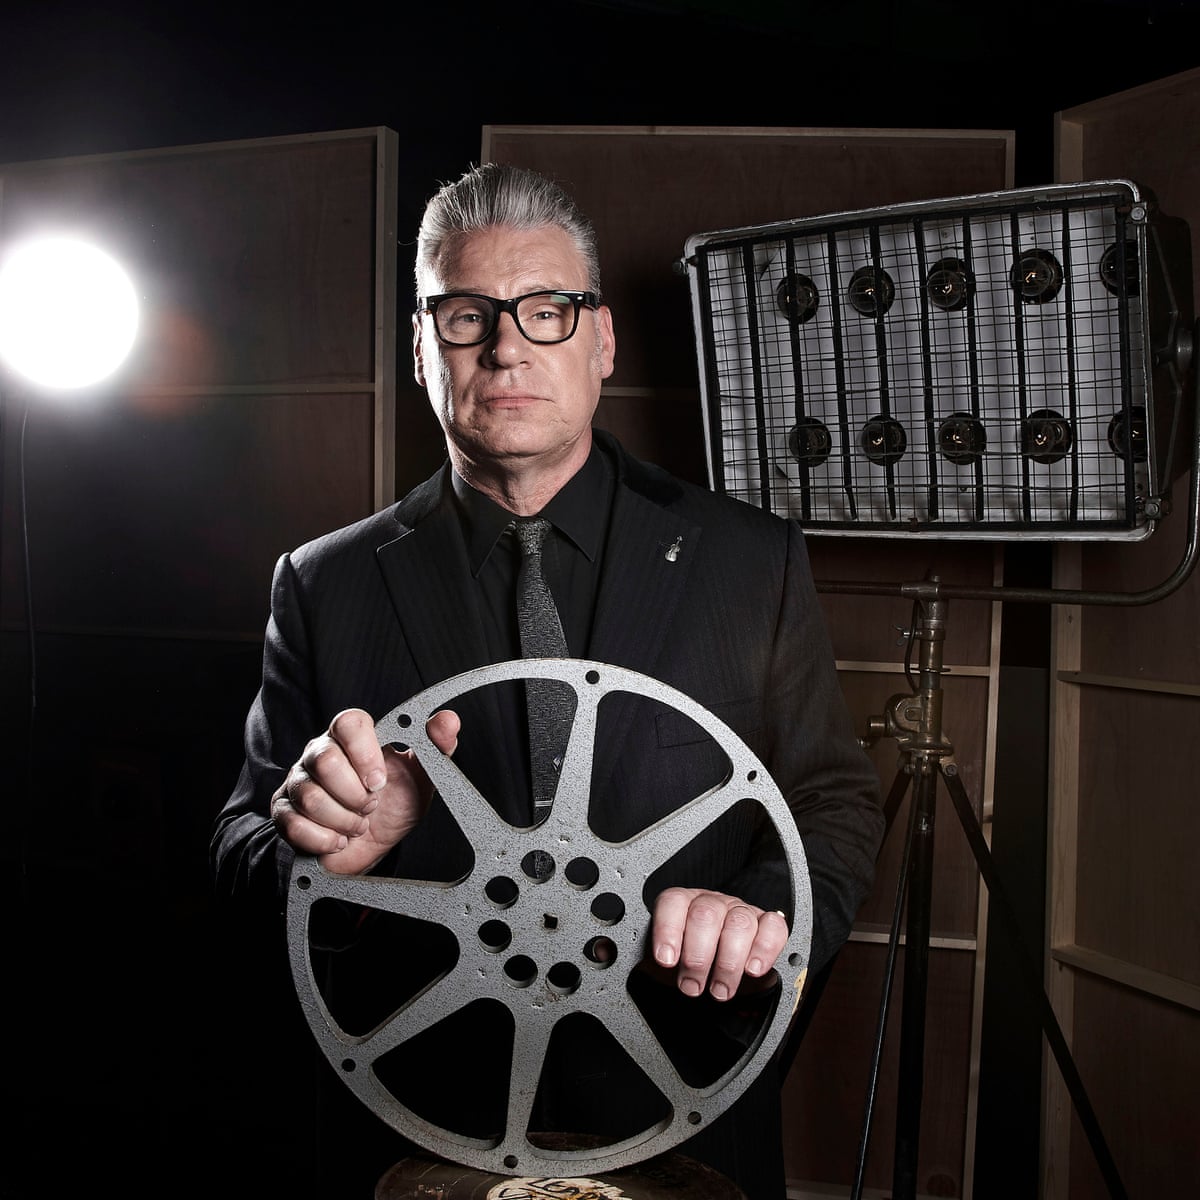 Mark Kermode S Secrets Of Cinema Review How Wallace And Gromit Inspired Tom Cruise Television Radio The Guardian